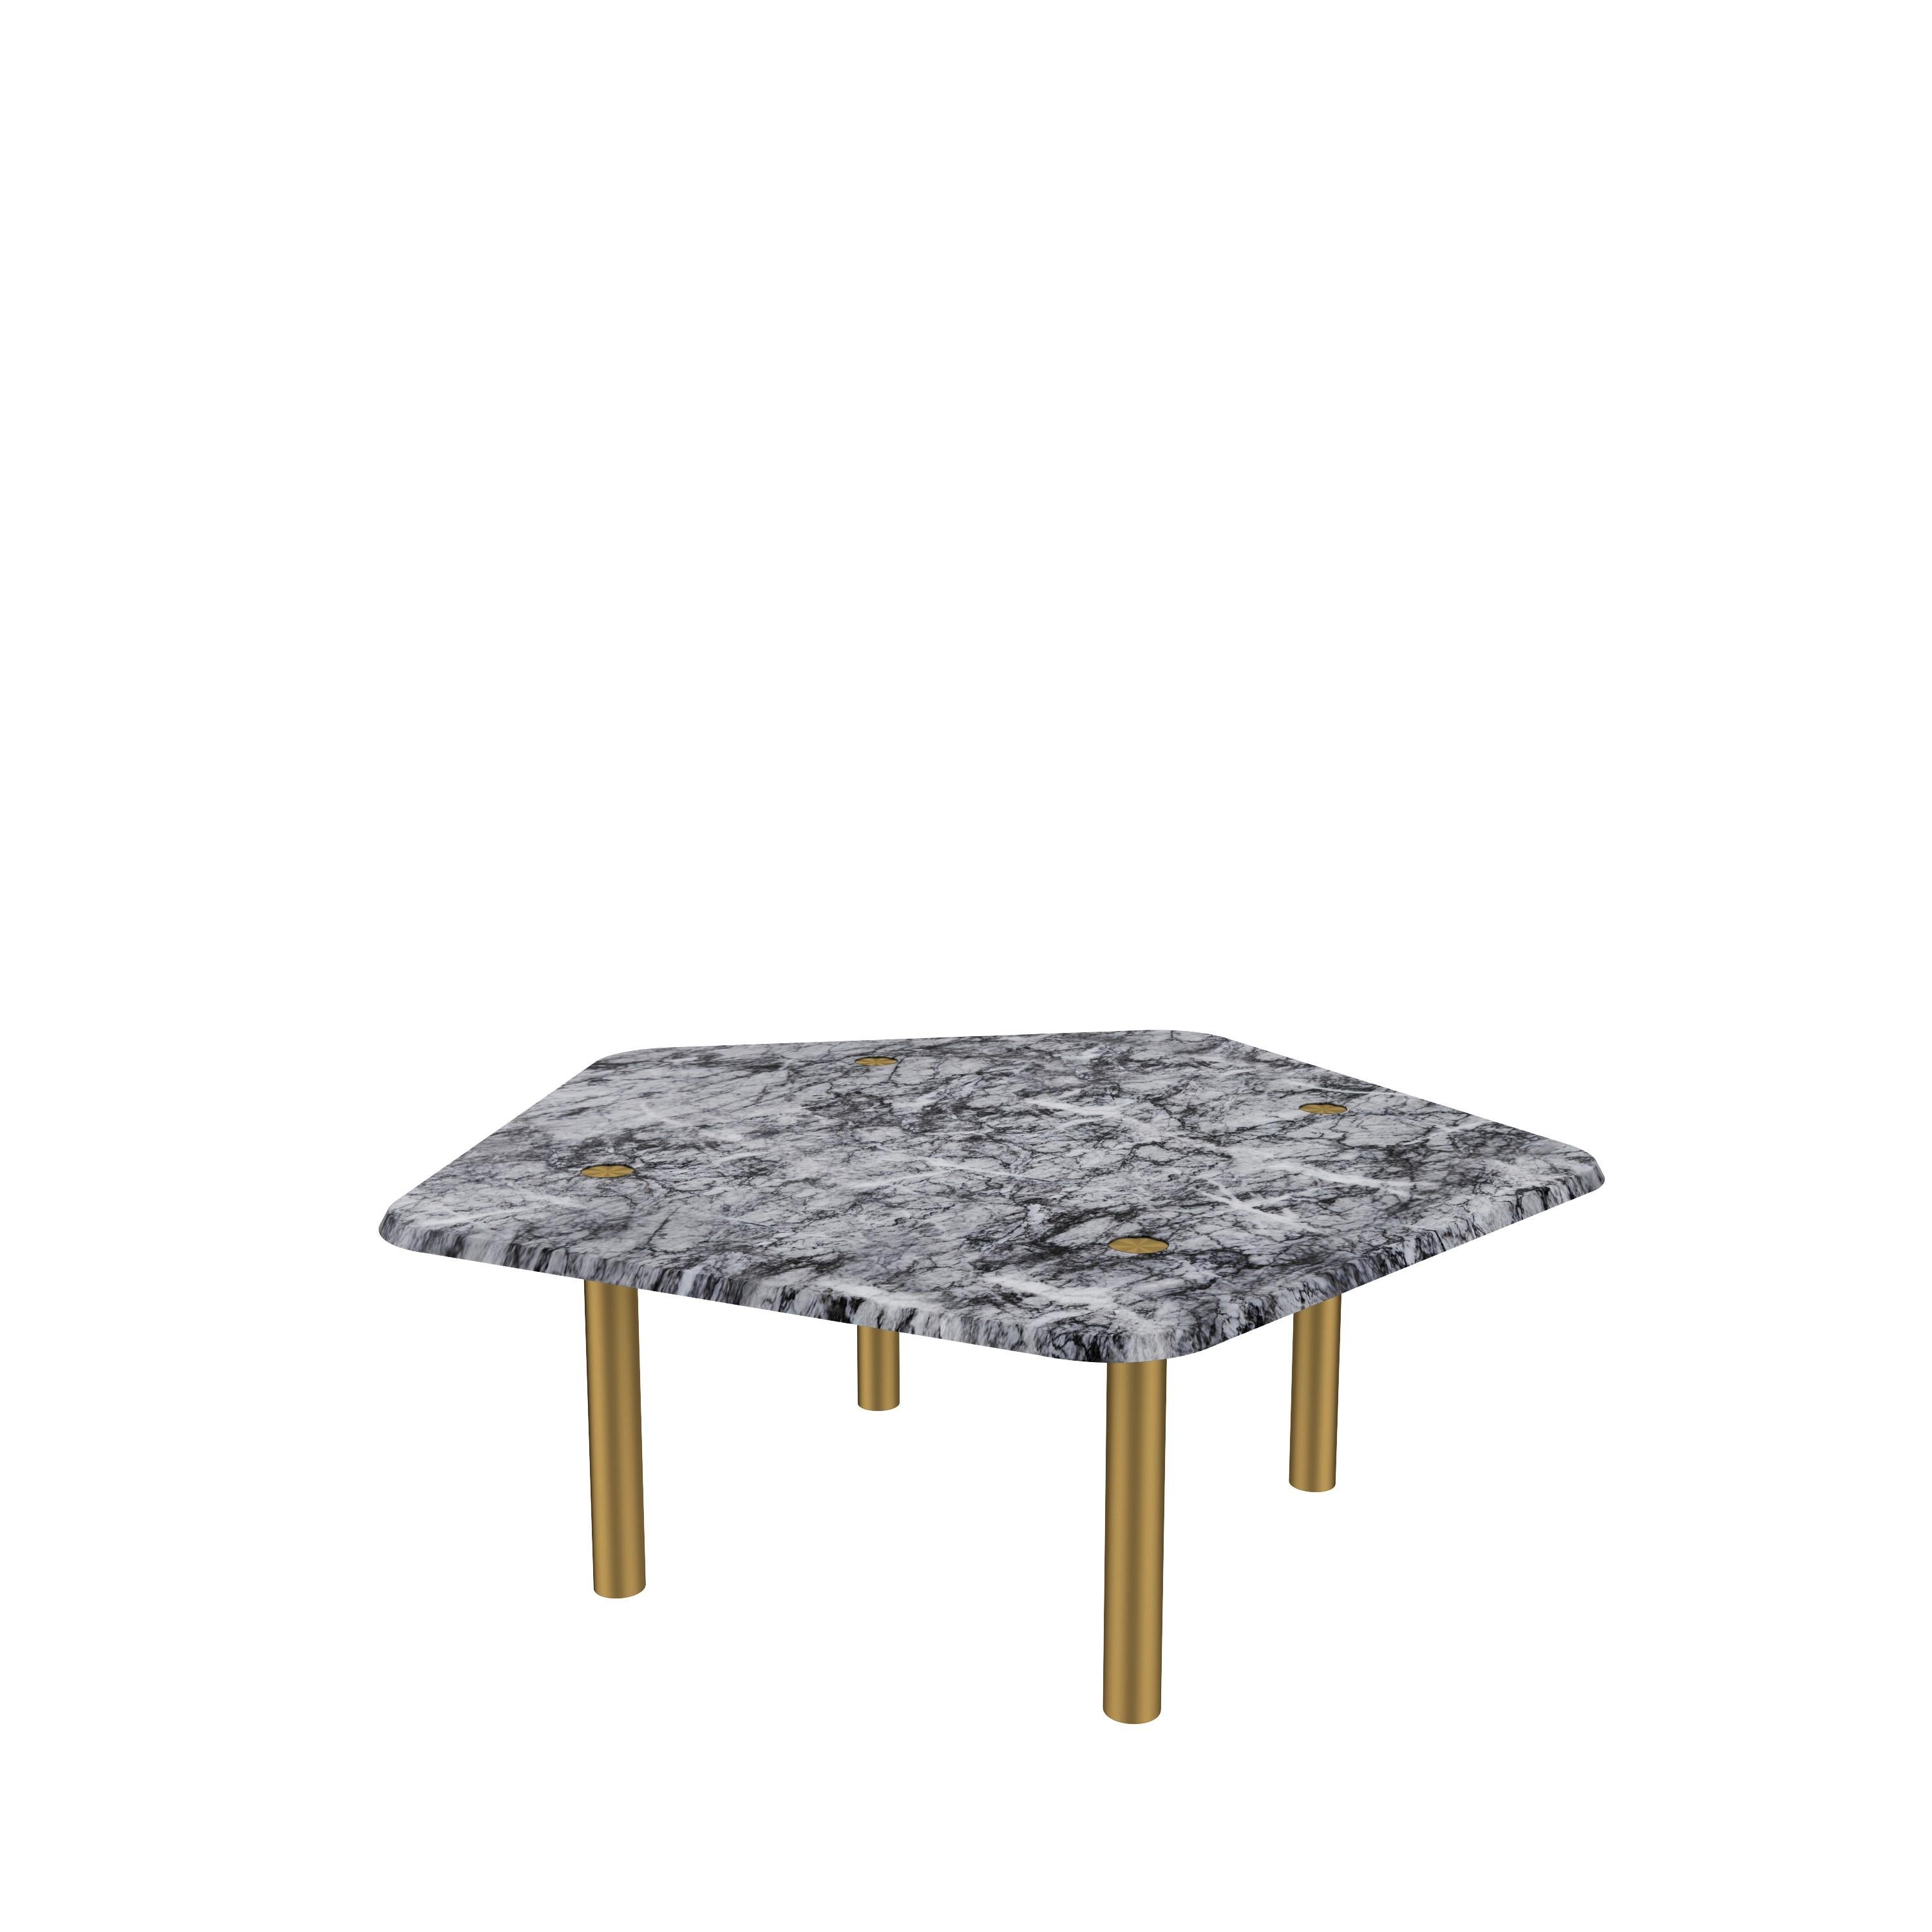 Chinese NORDST JOB Coffee Table, Italian White Mountain Marble, Danish Modern Design For Sale